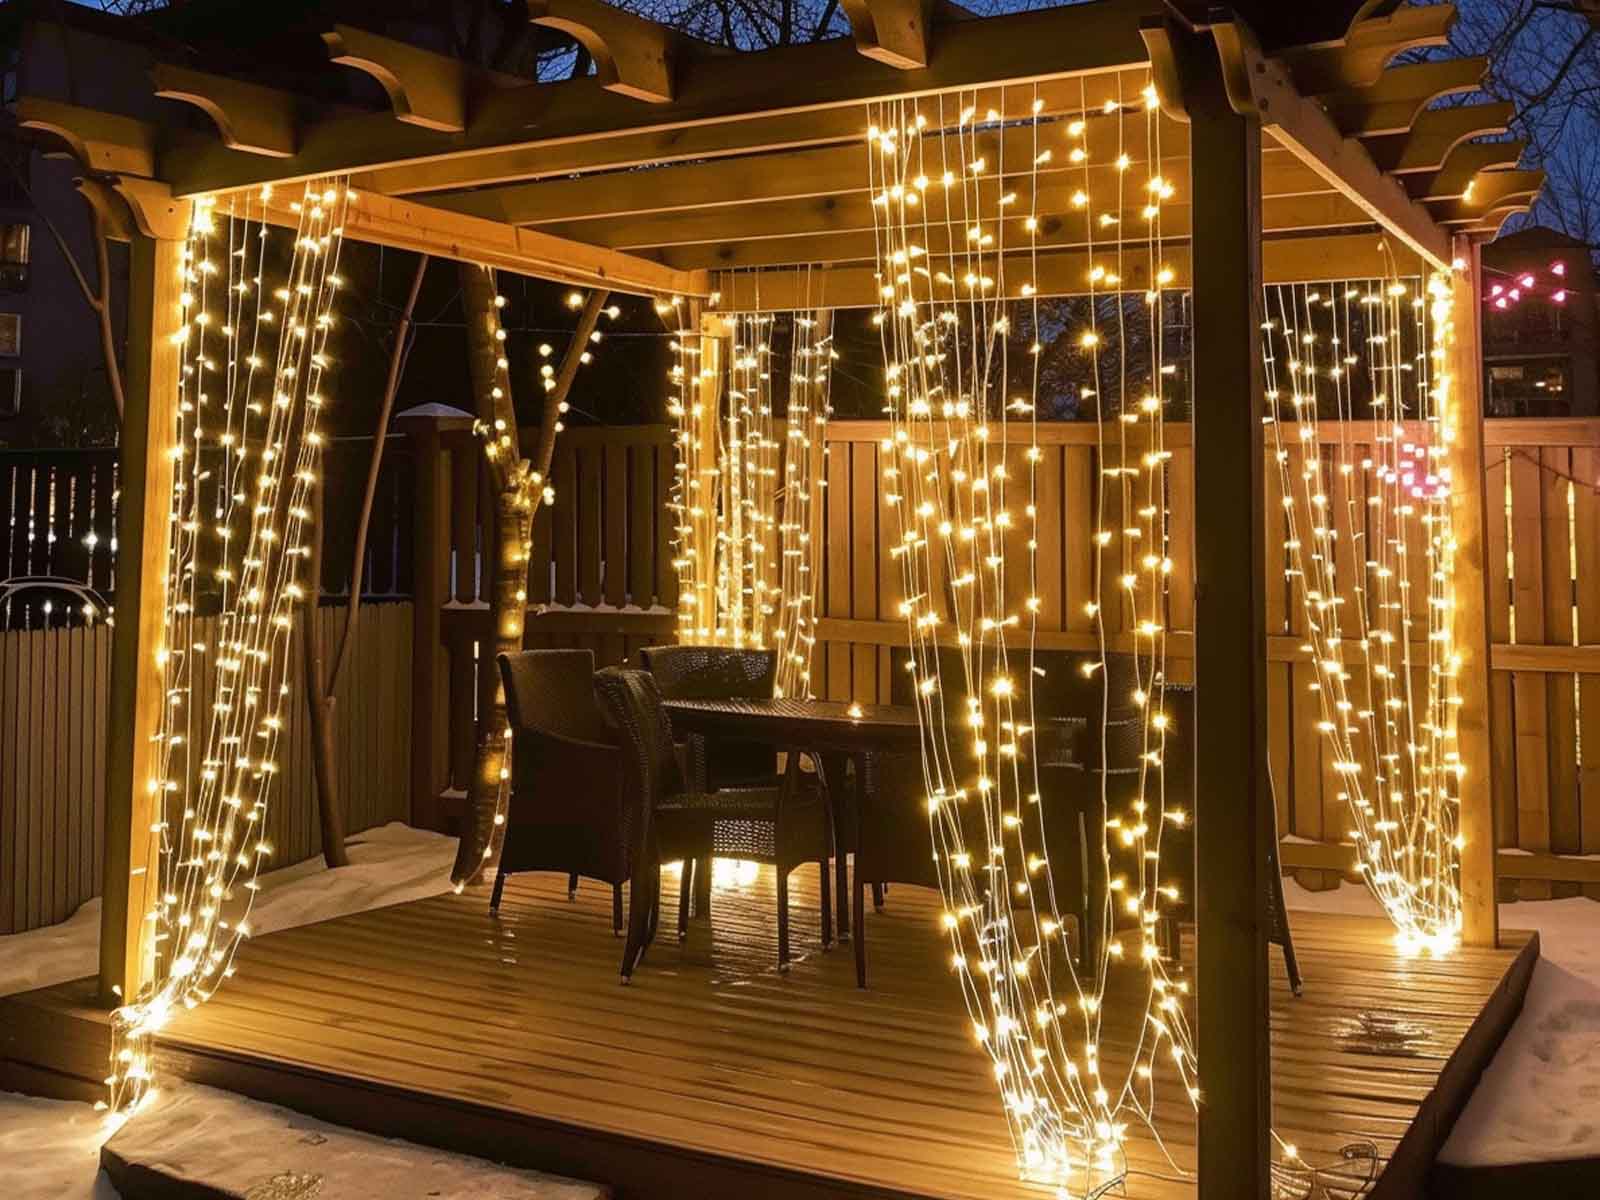 Curtain lights hanging from a pergola roof